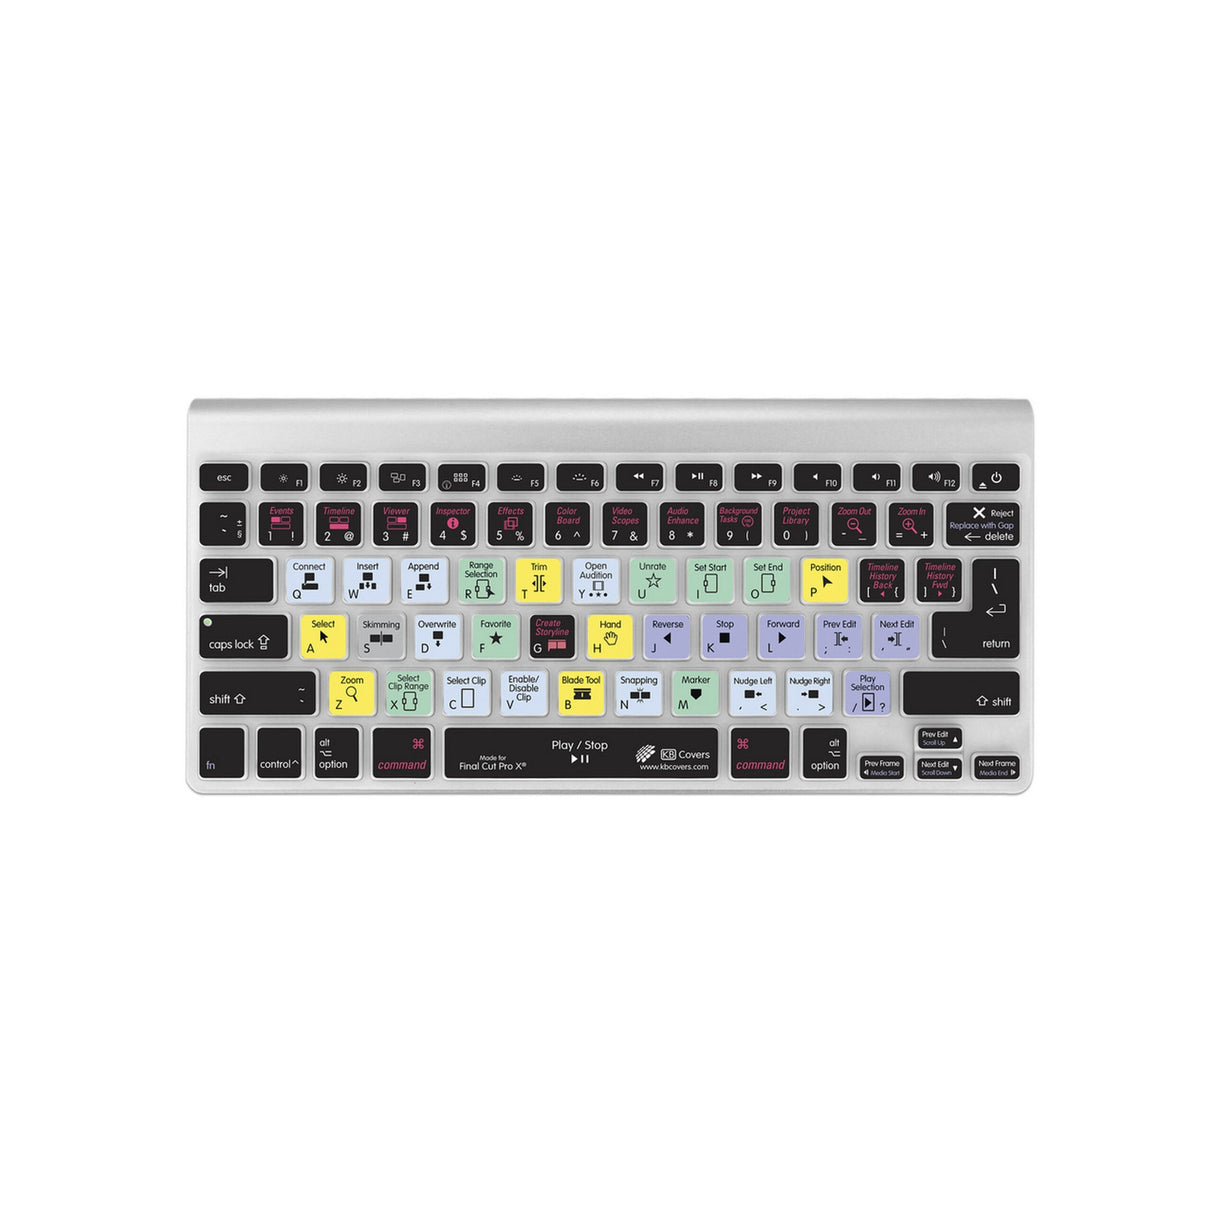 KB Covers FCPX-M-CC-2 Final Cut Pro X Keyboard Cover for MacBook/Air 13/Pro 2008+/Retina and Wireless